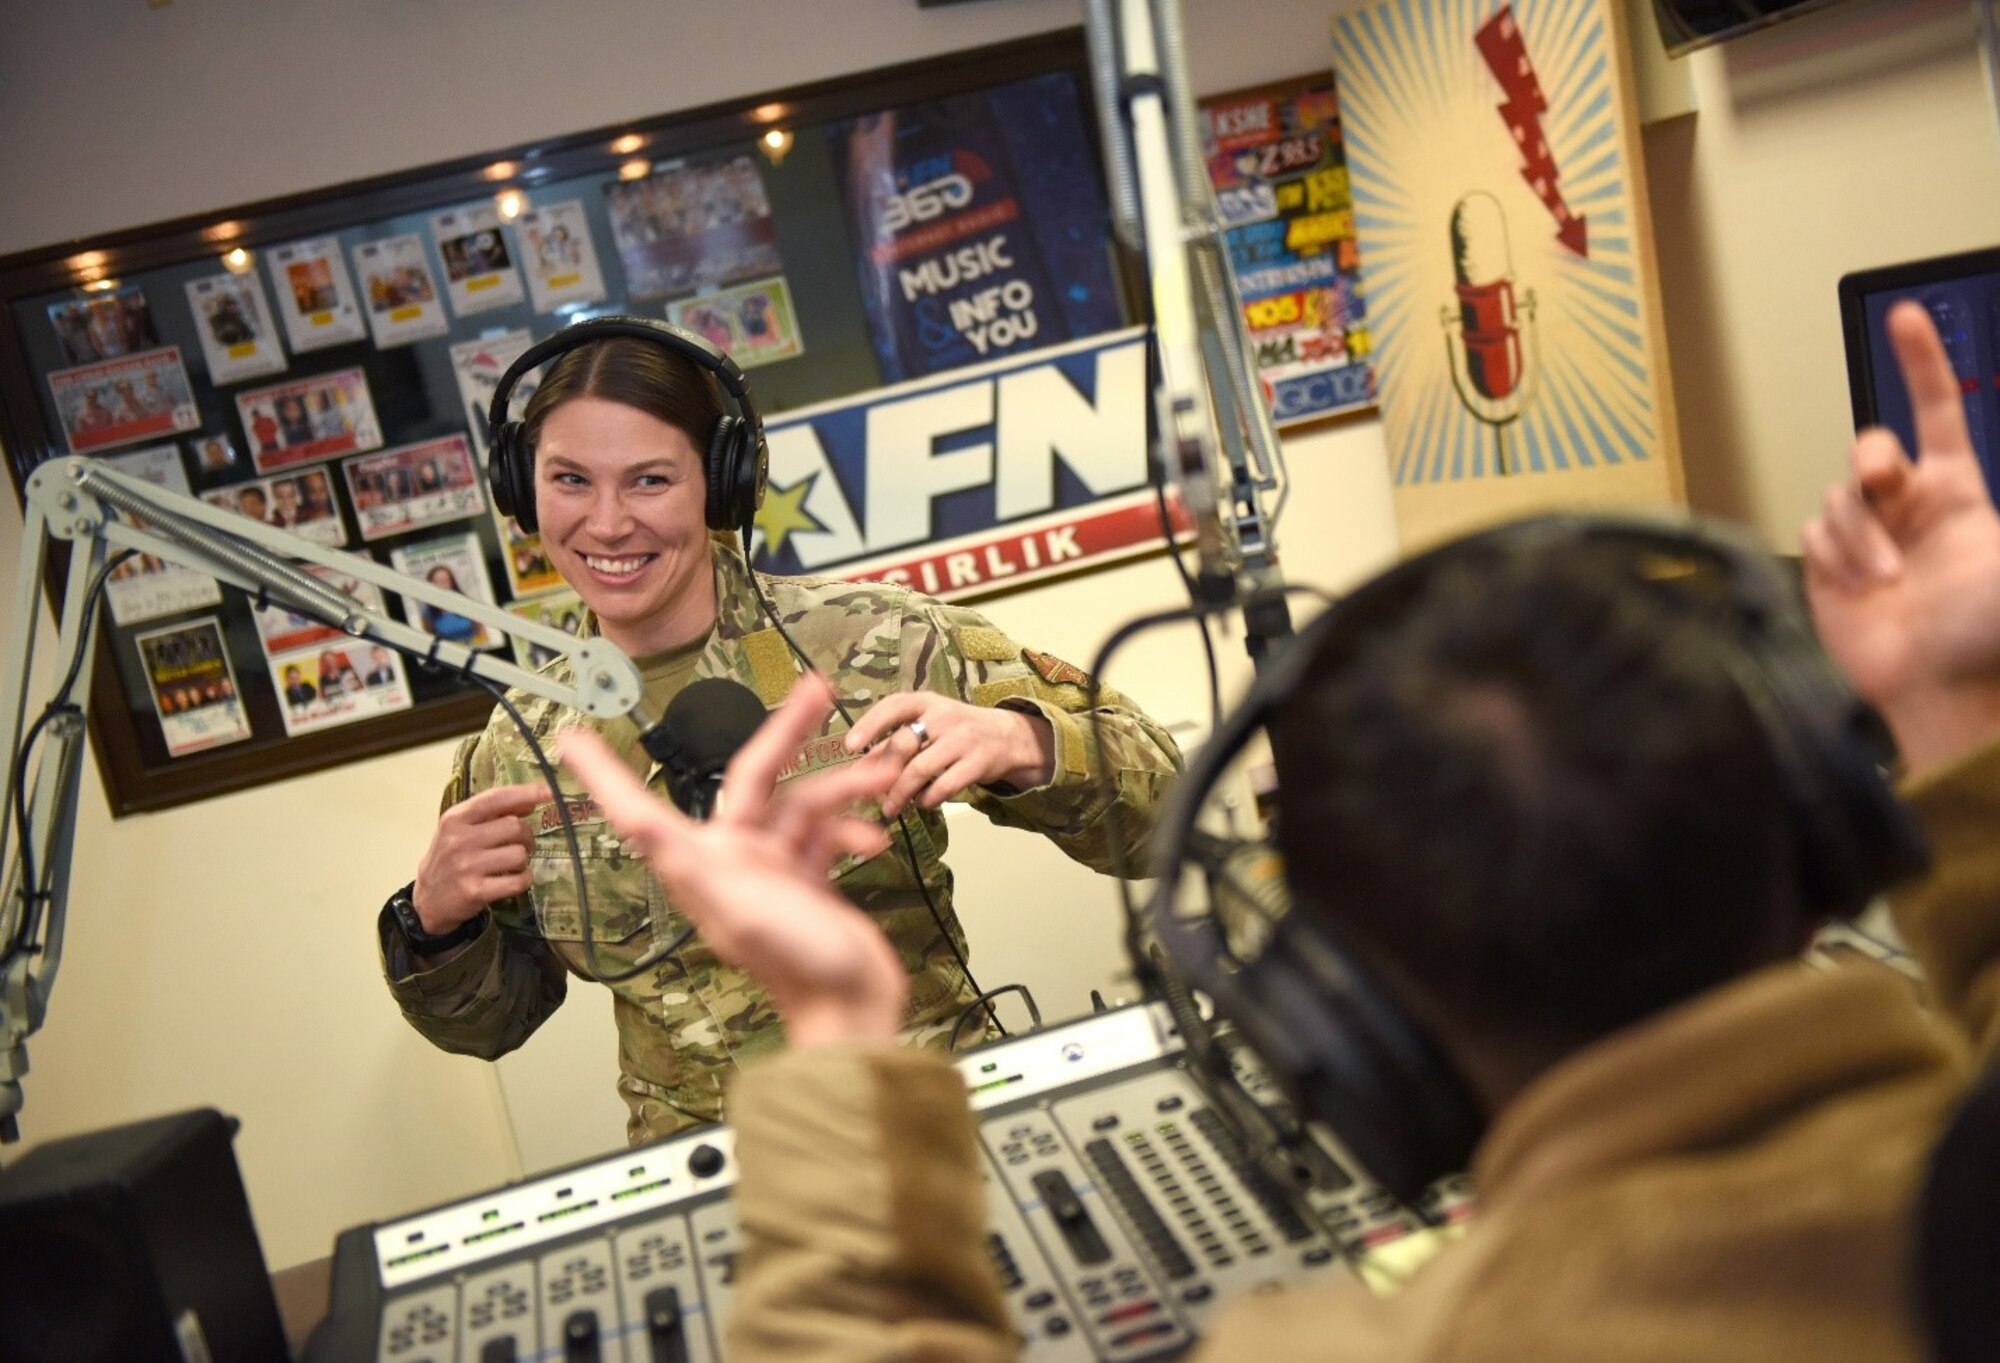 Tech Sgt. Rosemary Gudex, American Forces Network Incirlik operations manager, motivates her troop before he starts his radio show at Incirlik Air Base, Turkey, March 23, 2022. Gudex spent years healing from her experience growing up with an alcoholic father. She now focuses her time and energy on things that hold value to her, like fitness and developing Airmen. (U.S. Air Force photo by Tech. Sgt. Crystal L. Charriere)